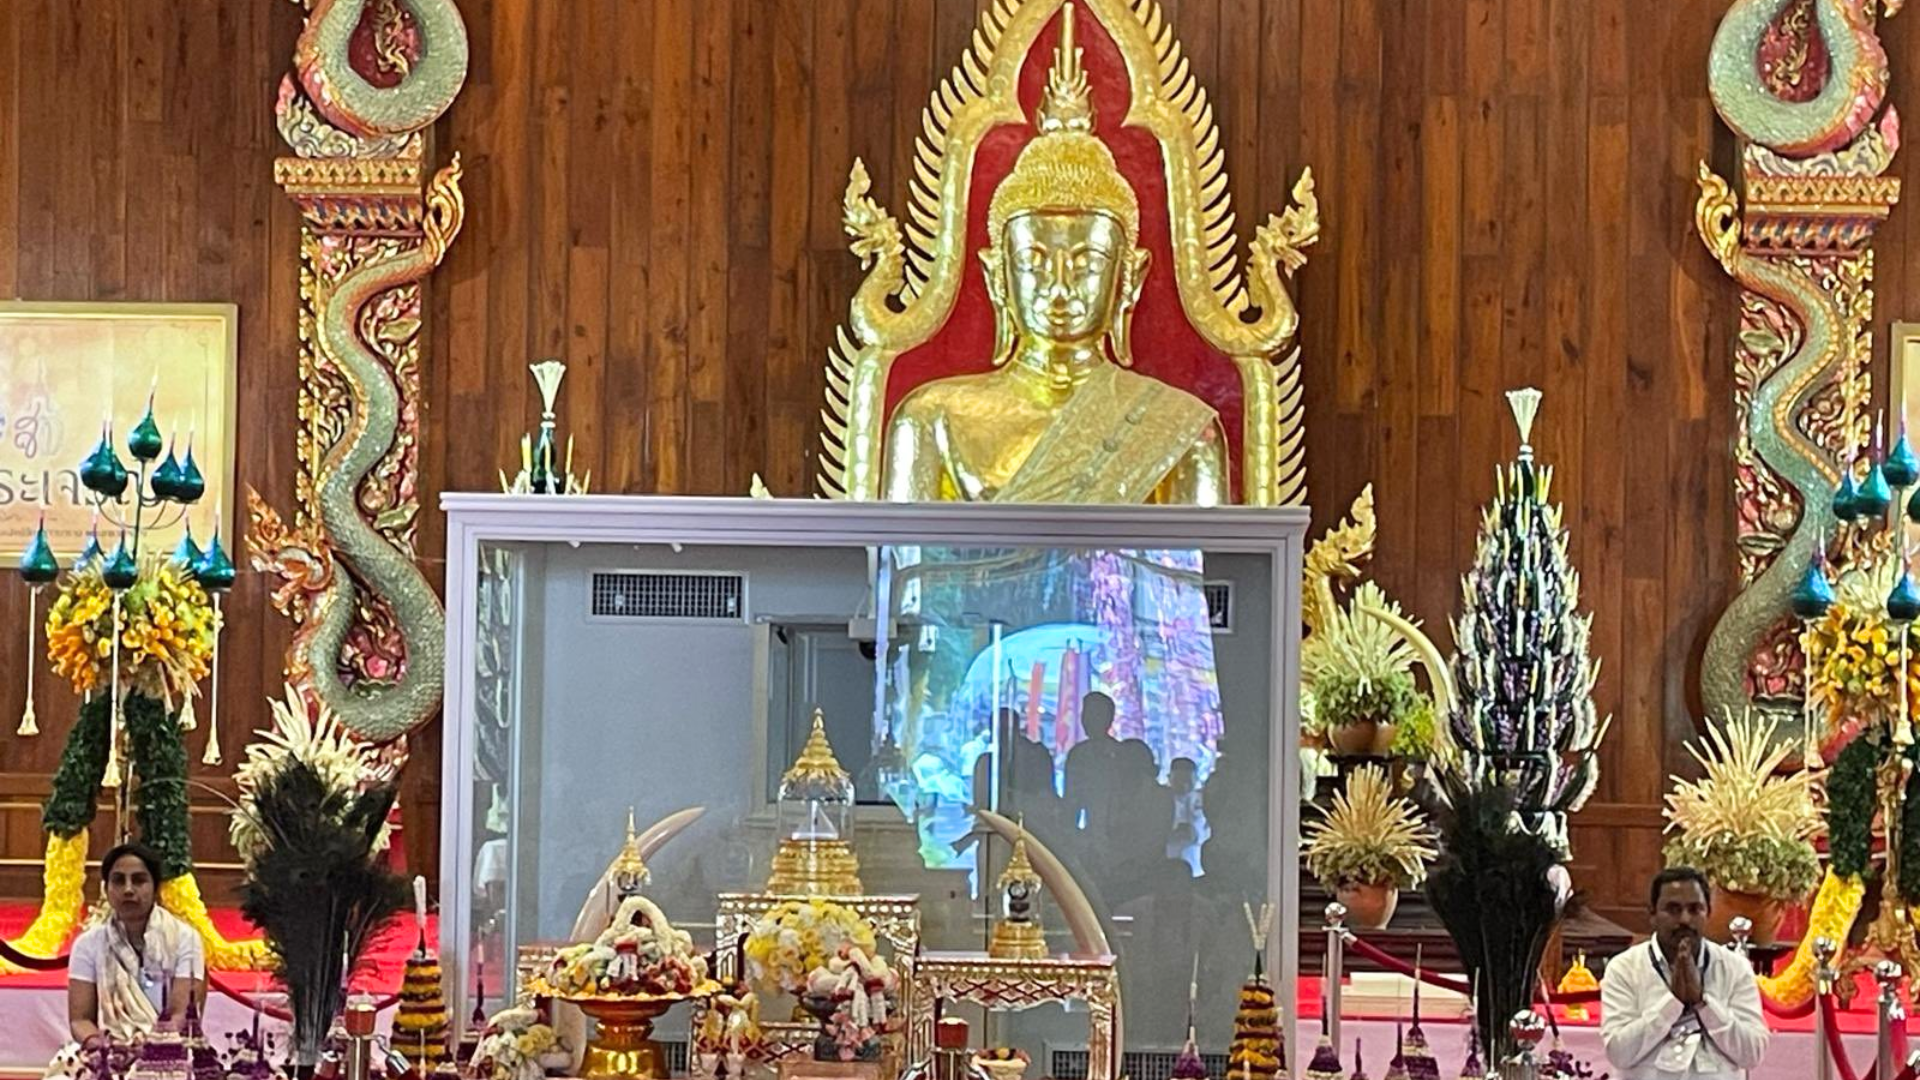 Thousands Of Devotees Reach Ubon Ratchathani In Thailand To Pay Respect To Lord Buddha’s Relics